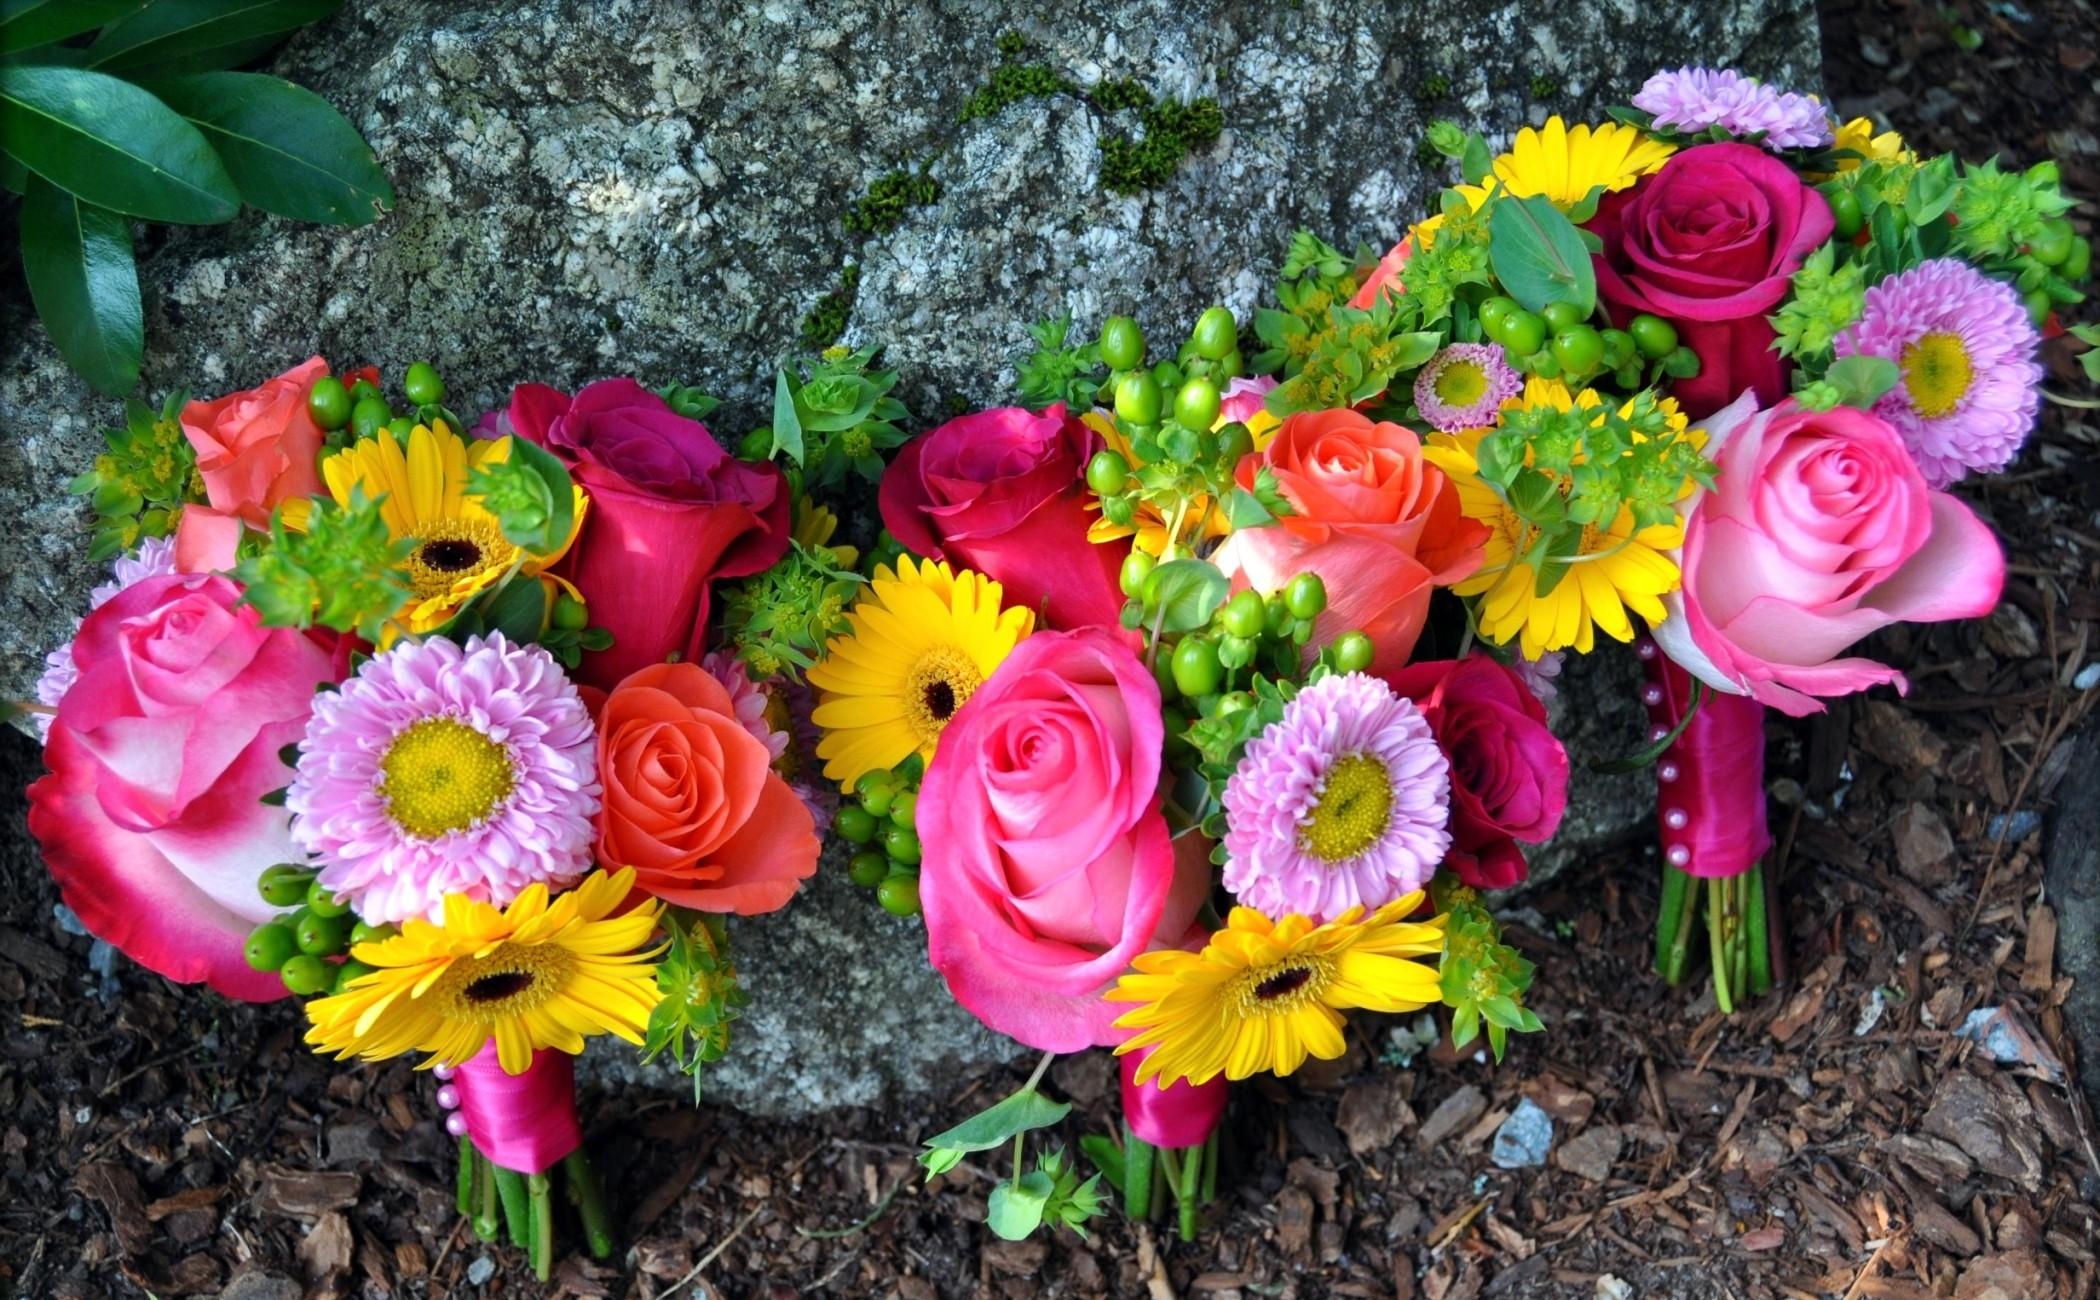 bouquets, flowers, roses, gerberas, rock, registration, typography, stone, three, asters